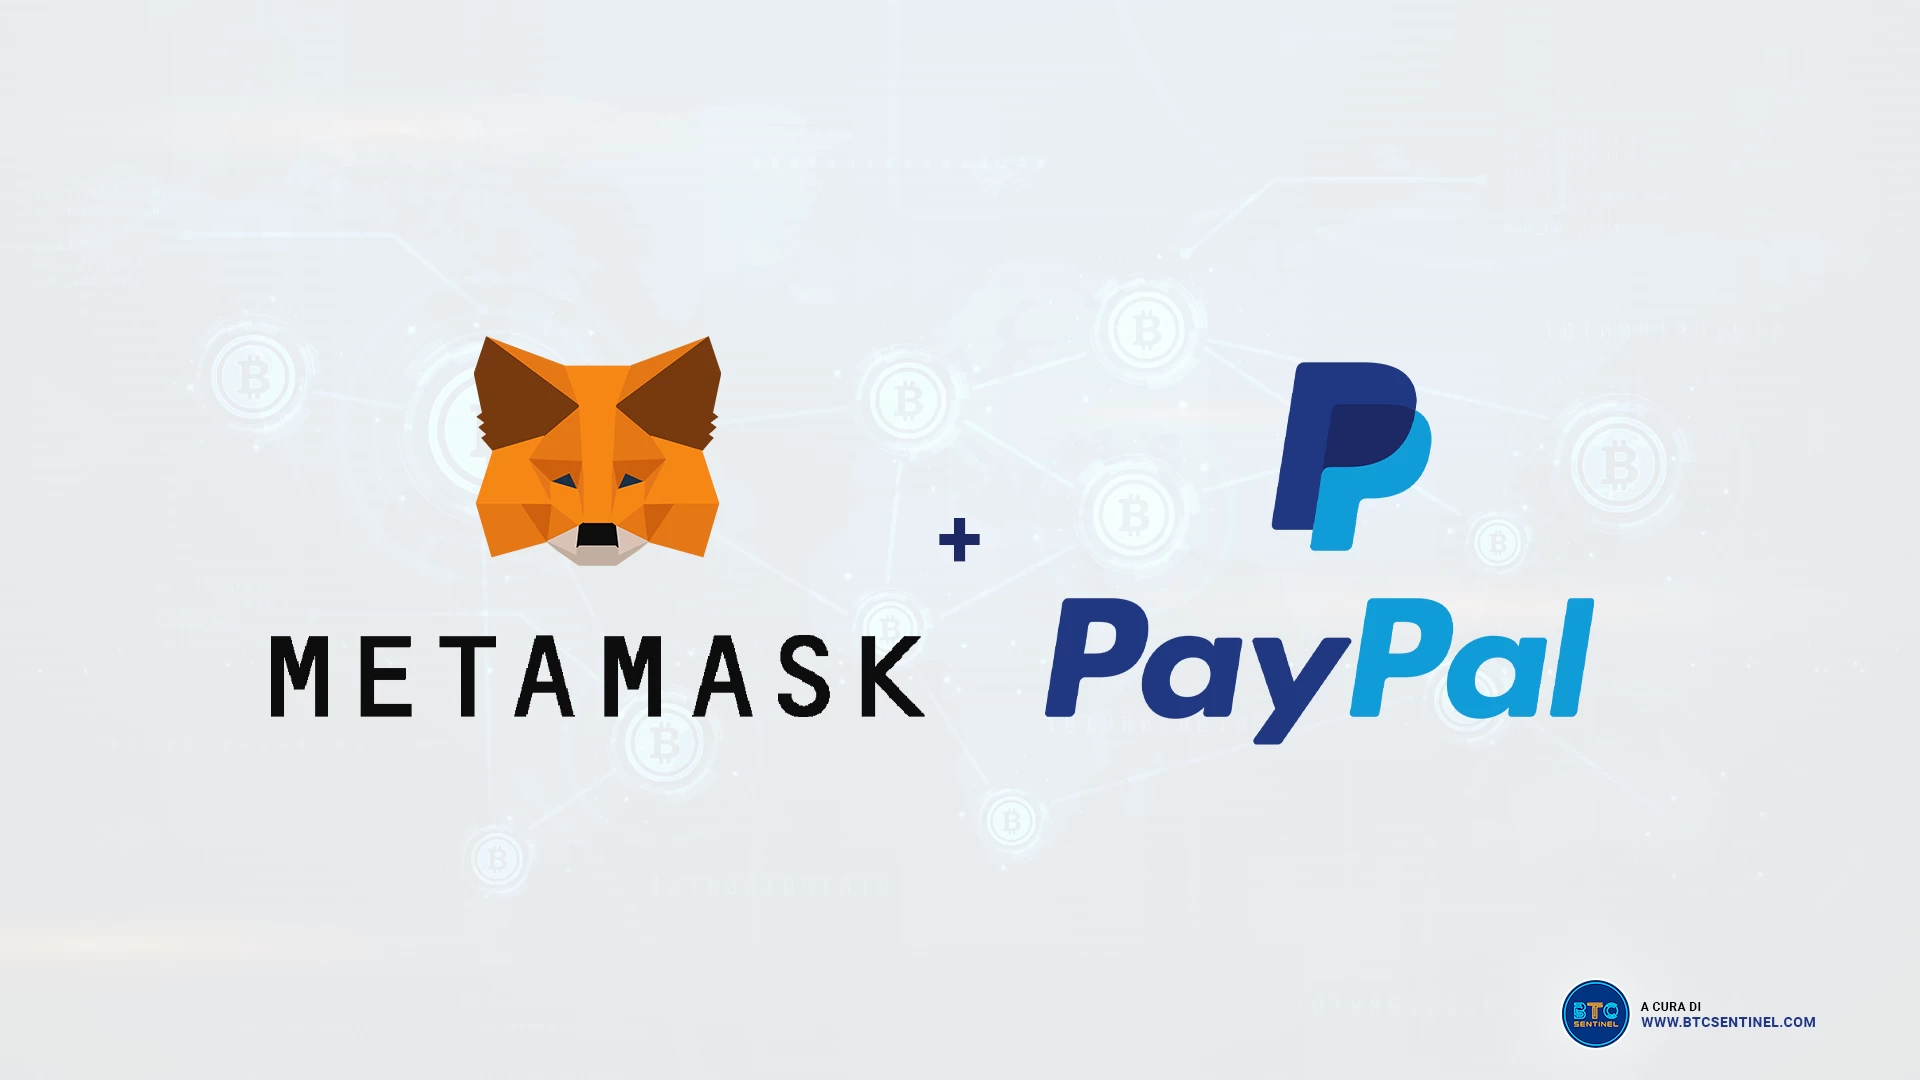 How to Use Metamask with PayPal for Secure and Convenient Crypto Transactions